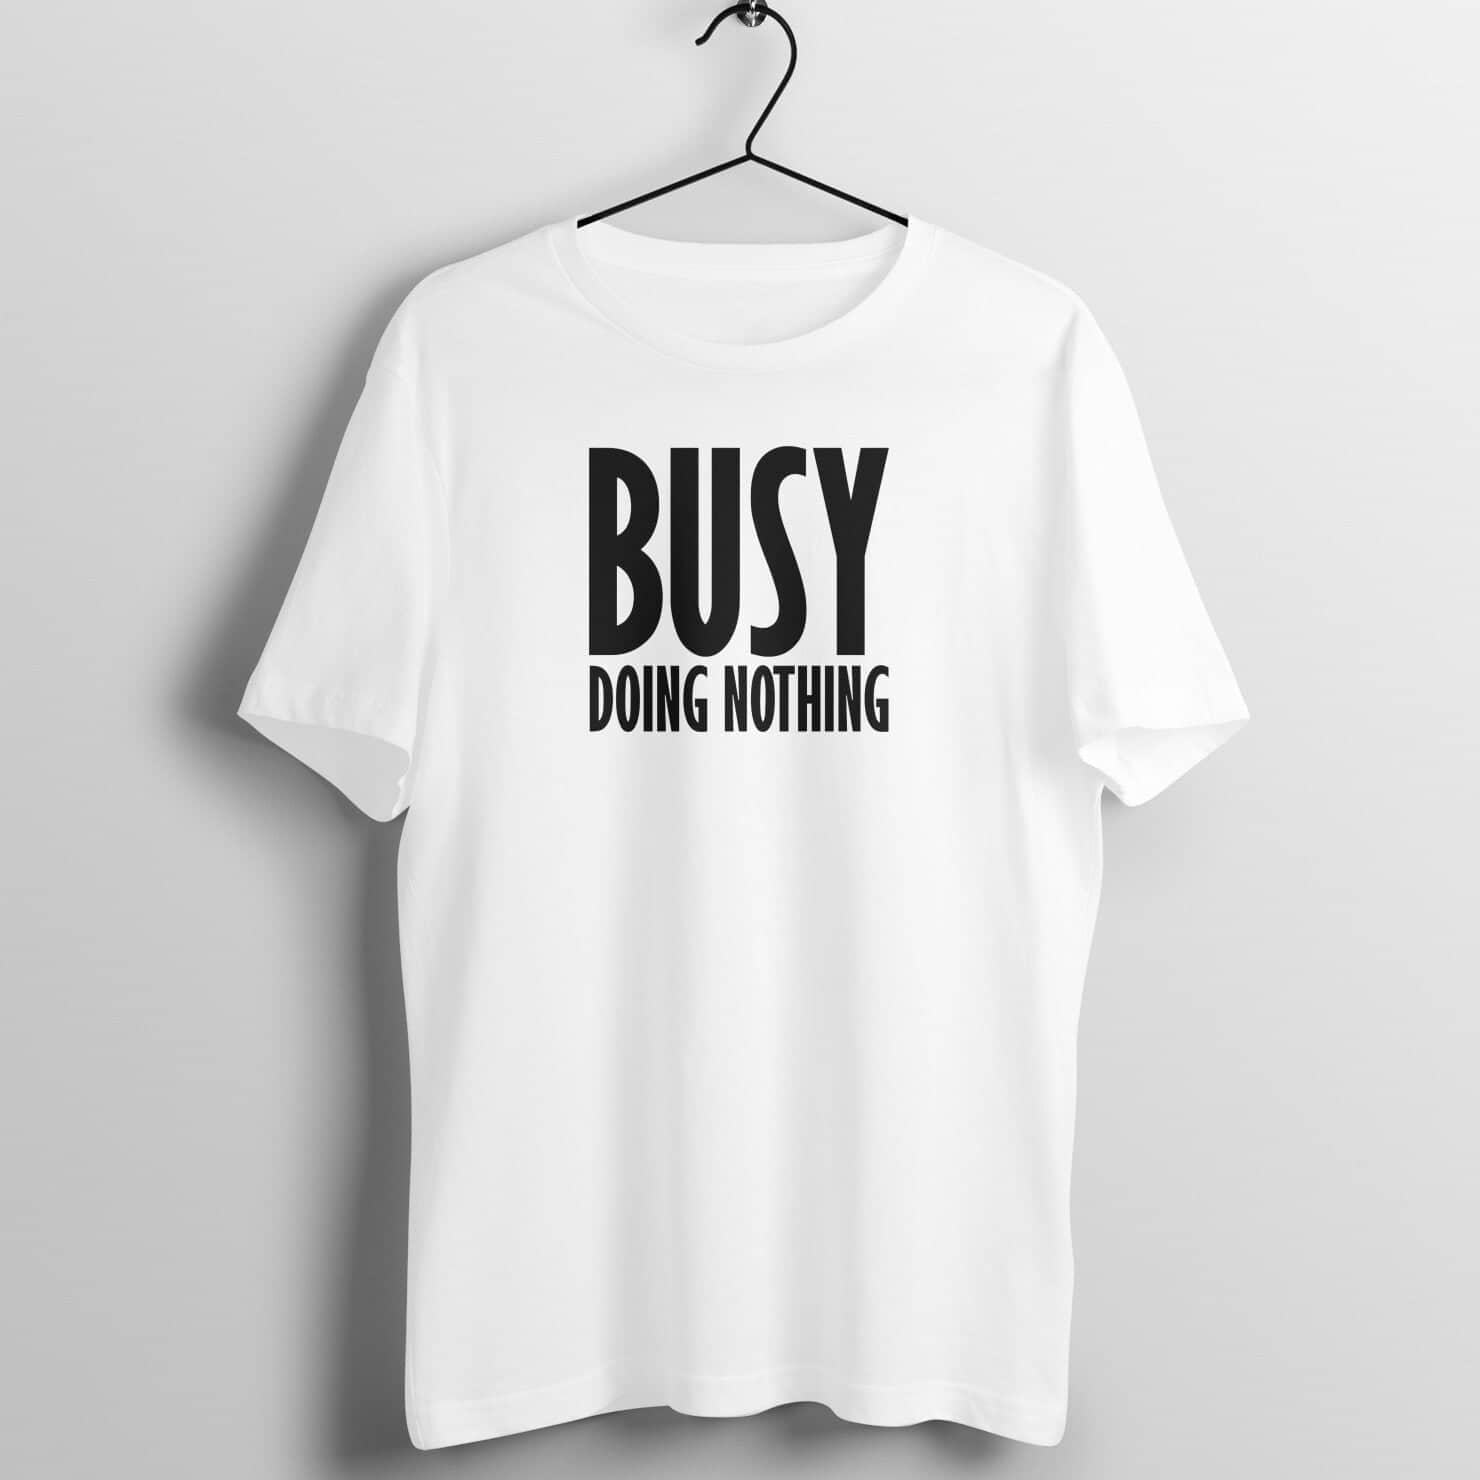 Busy Doing Nothing Funny White T Shirt for Men and Women Printrove White S 